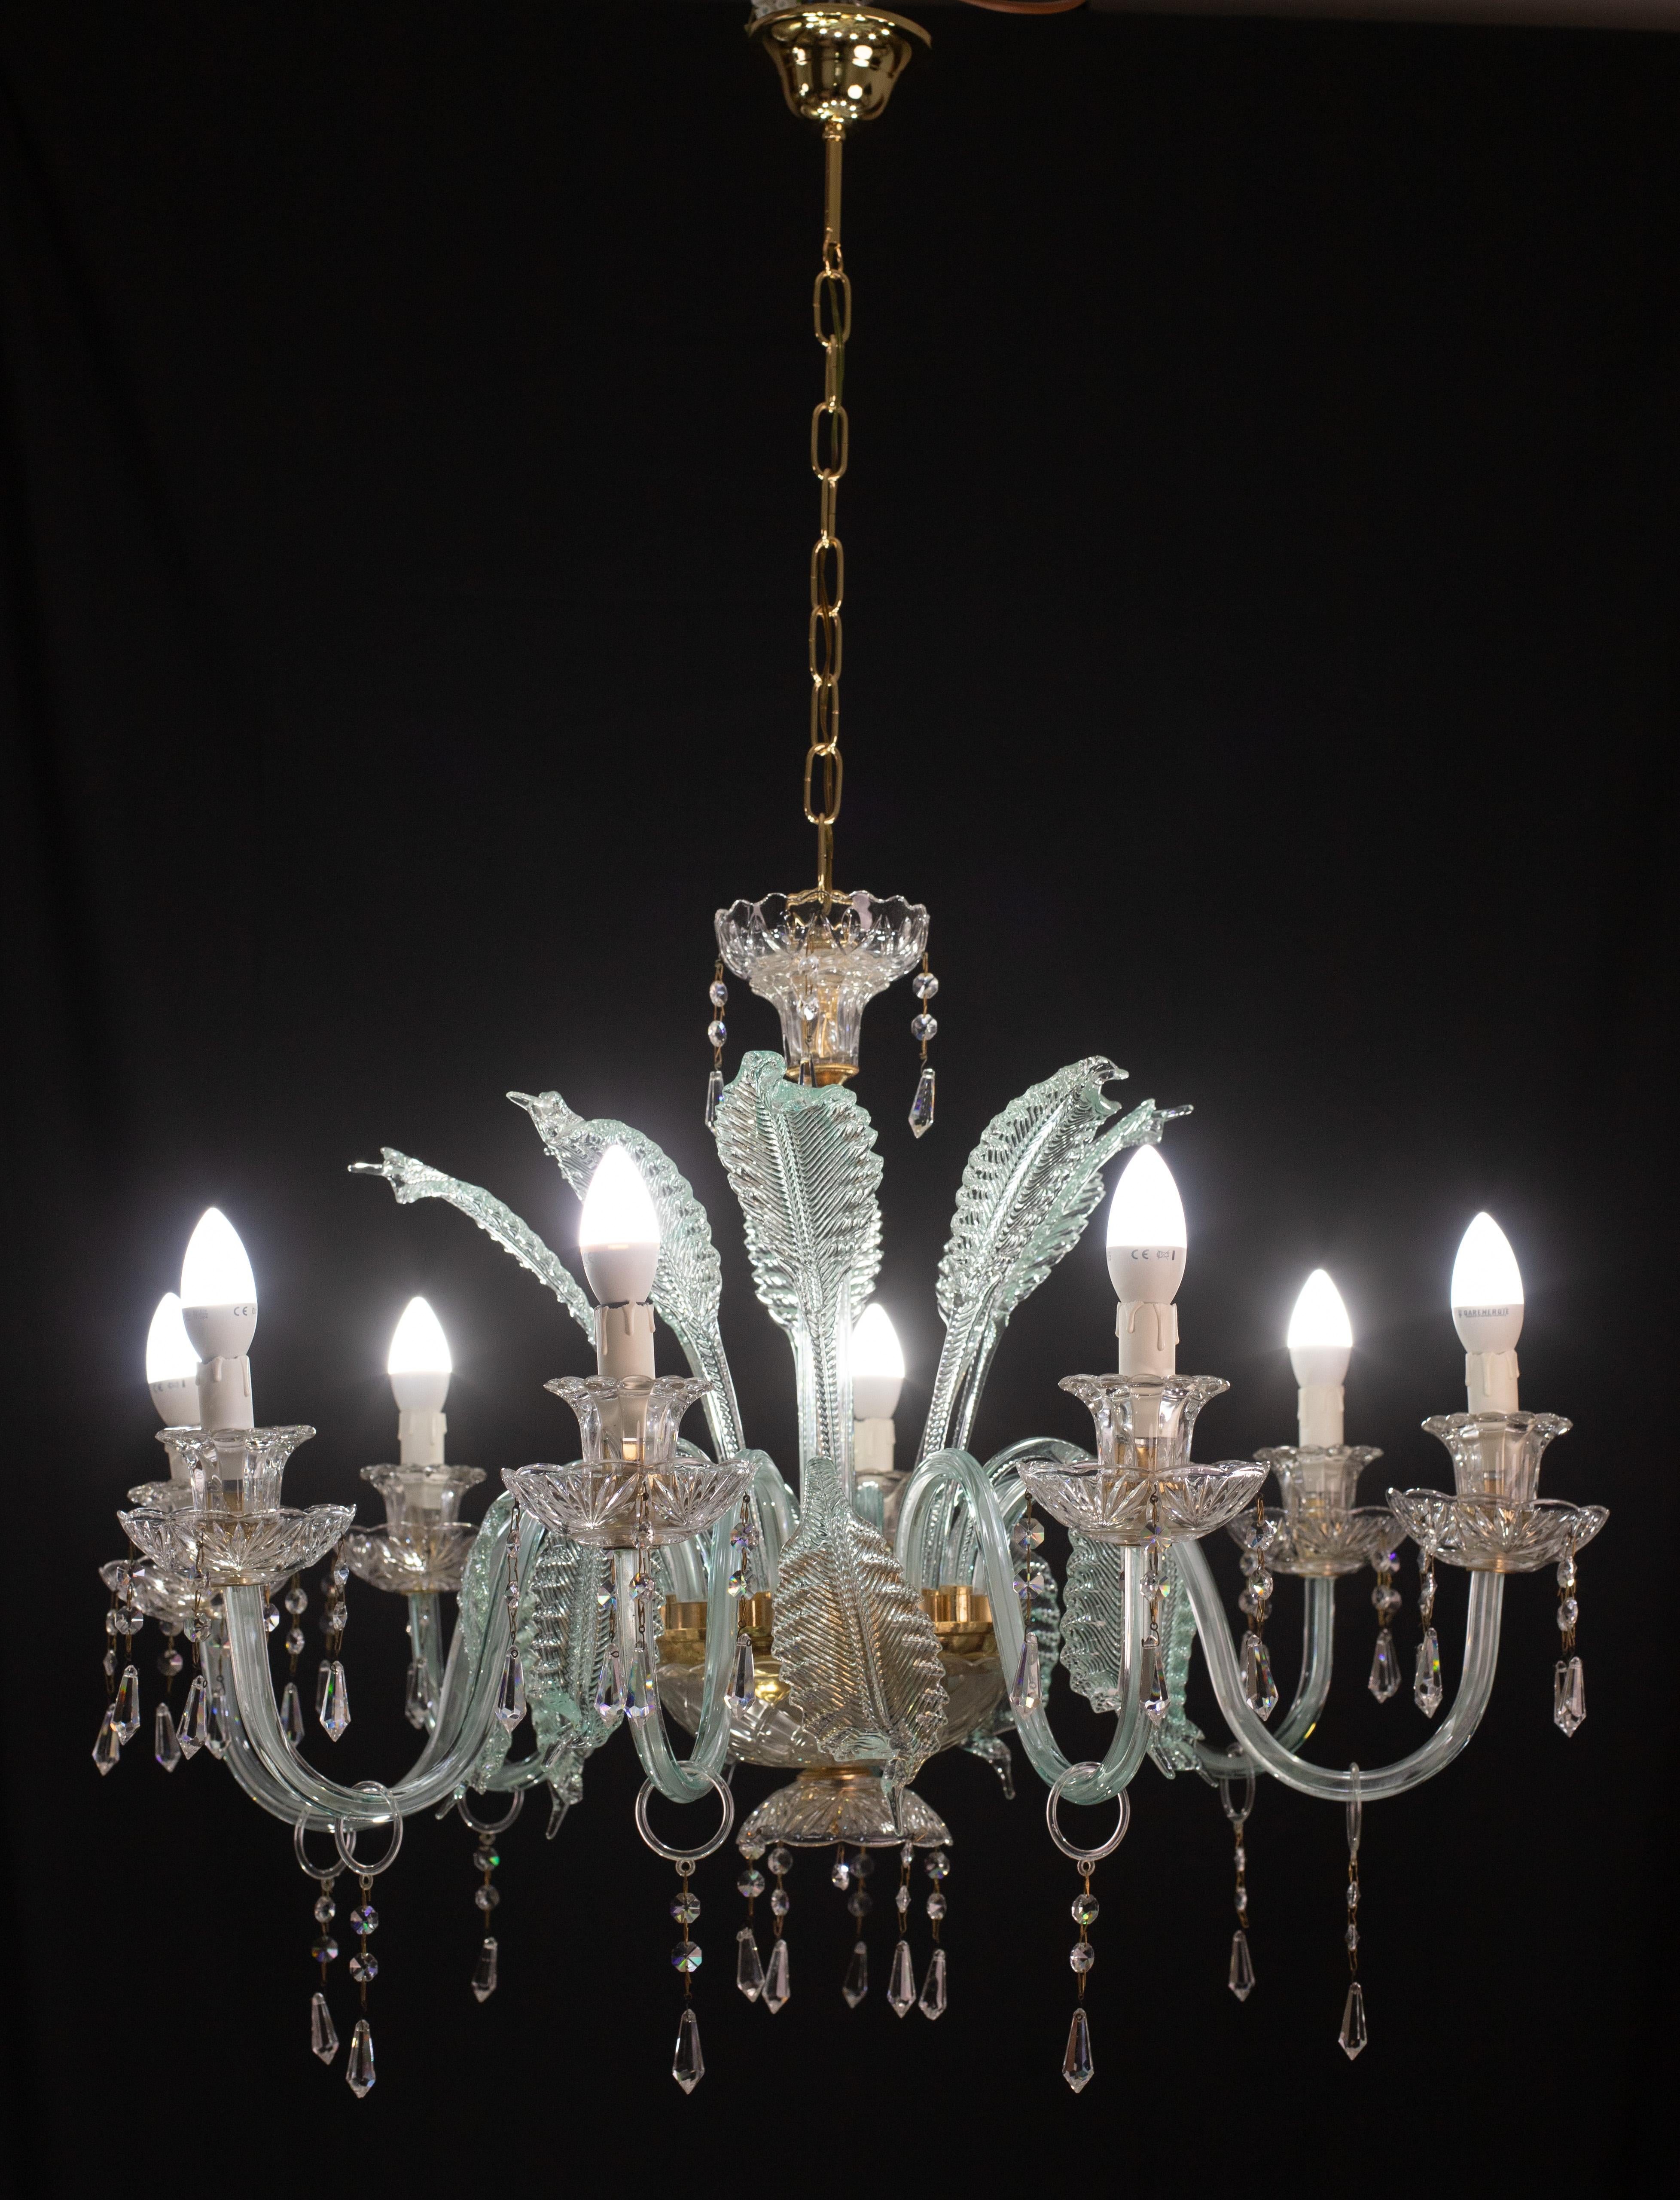 Exceptional 8-light crystal and Murano glass chandelier in pink color.

The light in perfect condition mounts 8 lights e14.

All glass is perfectly intact, the chain and rosette have been replaced.

Measurements (cm)

h 120 cm
Diameter 90
H without